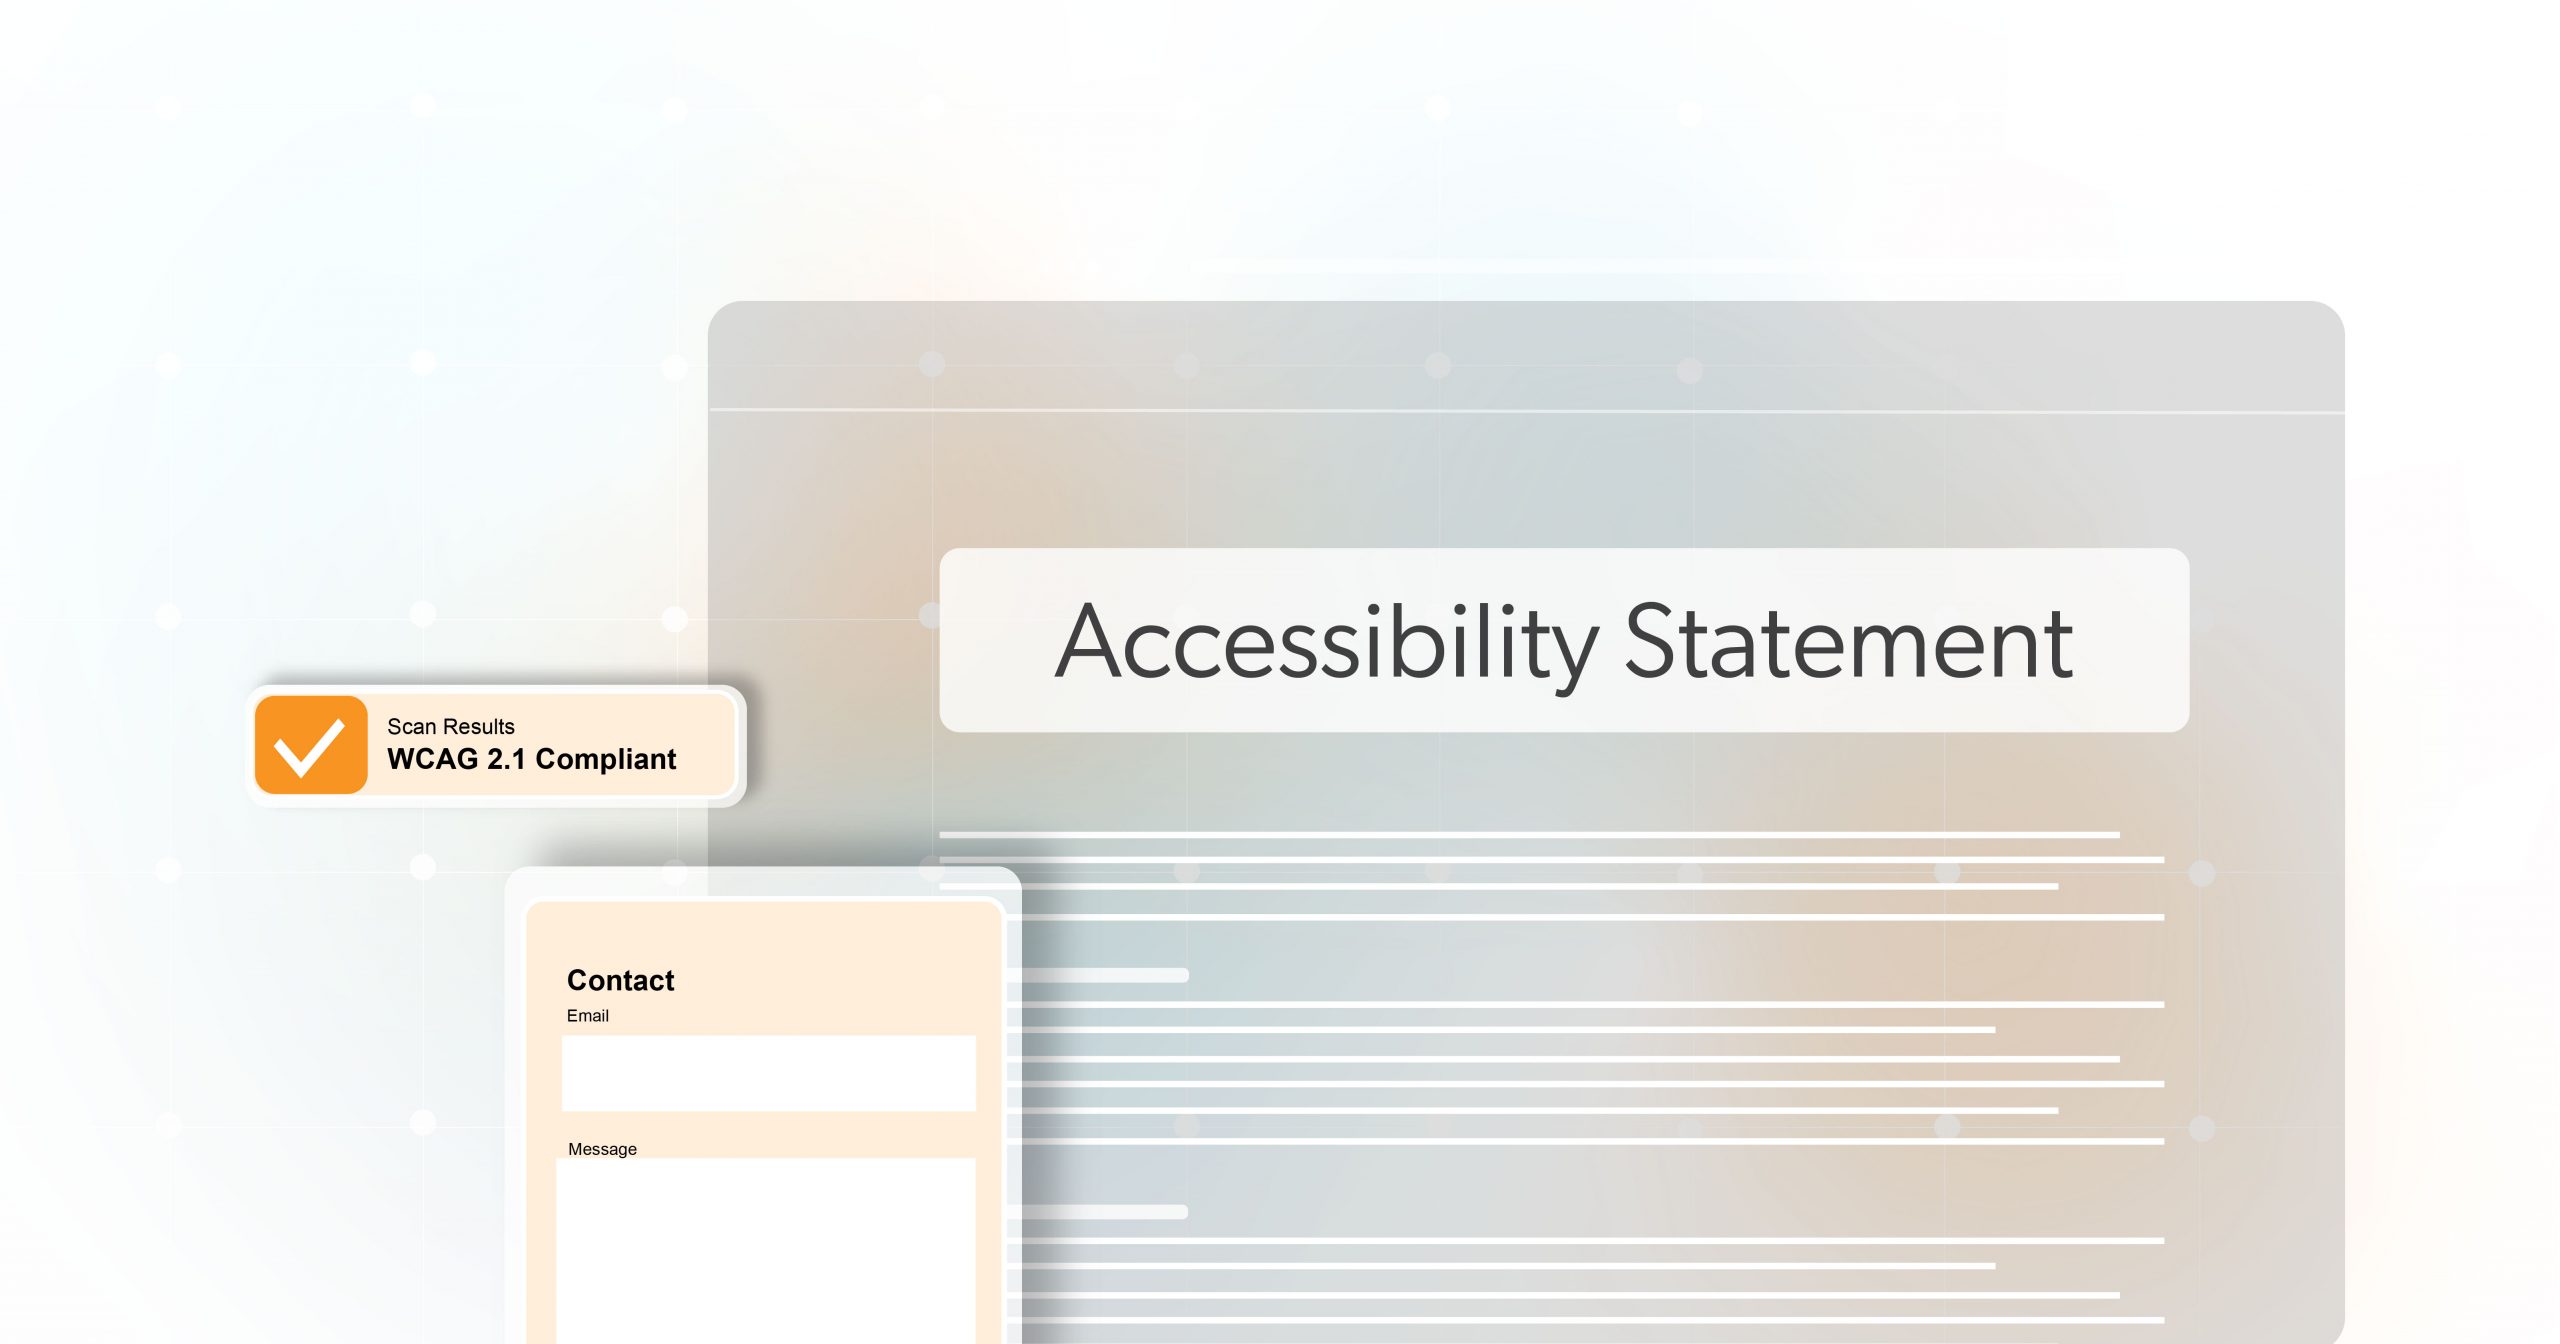 What Is An Accessibility Statement?